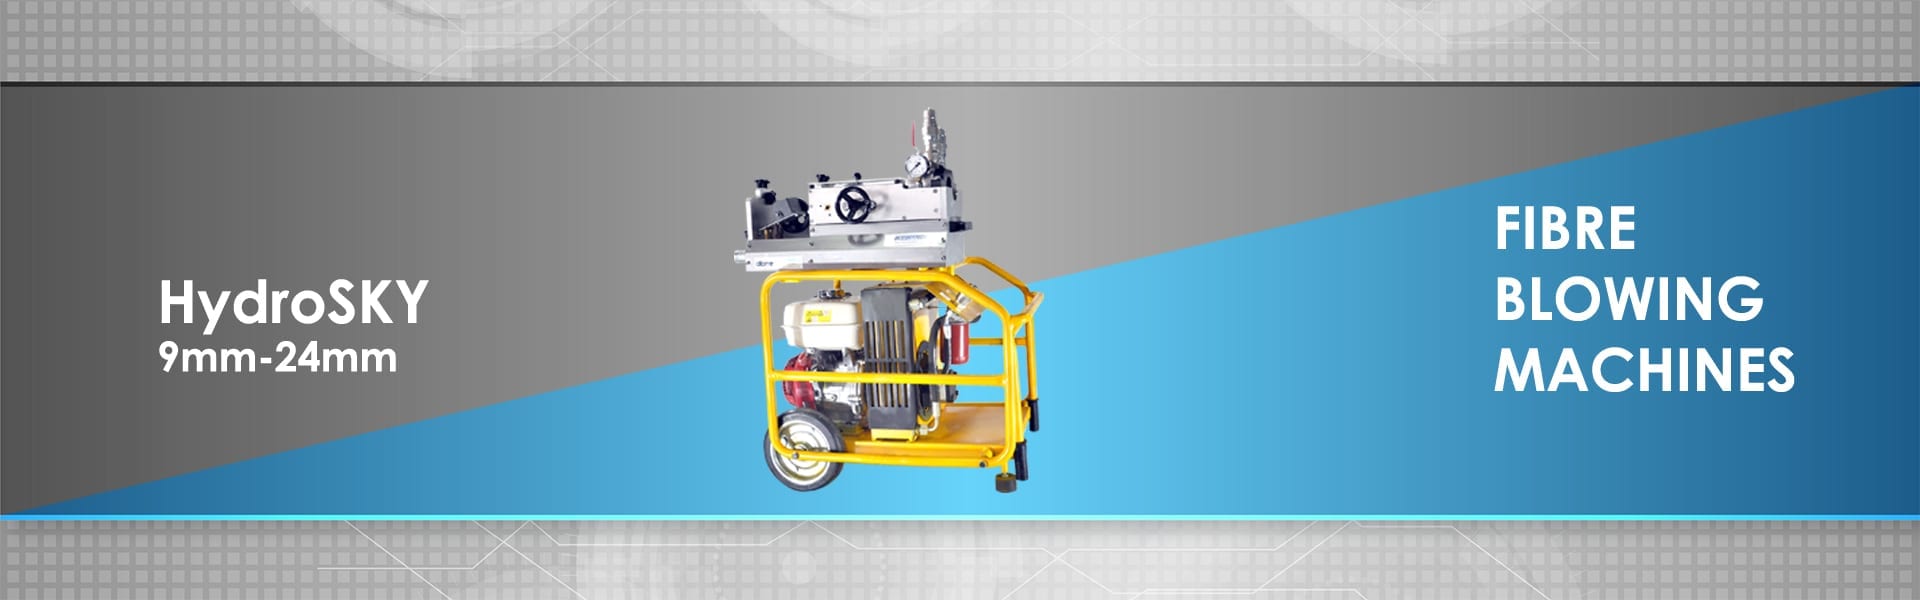 HydroSKY-Cable-blowing-machines